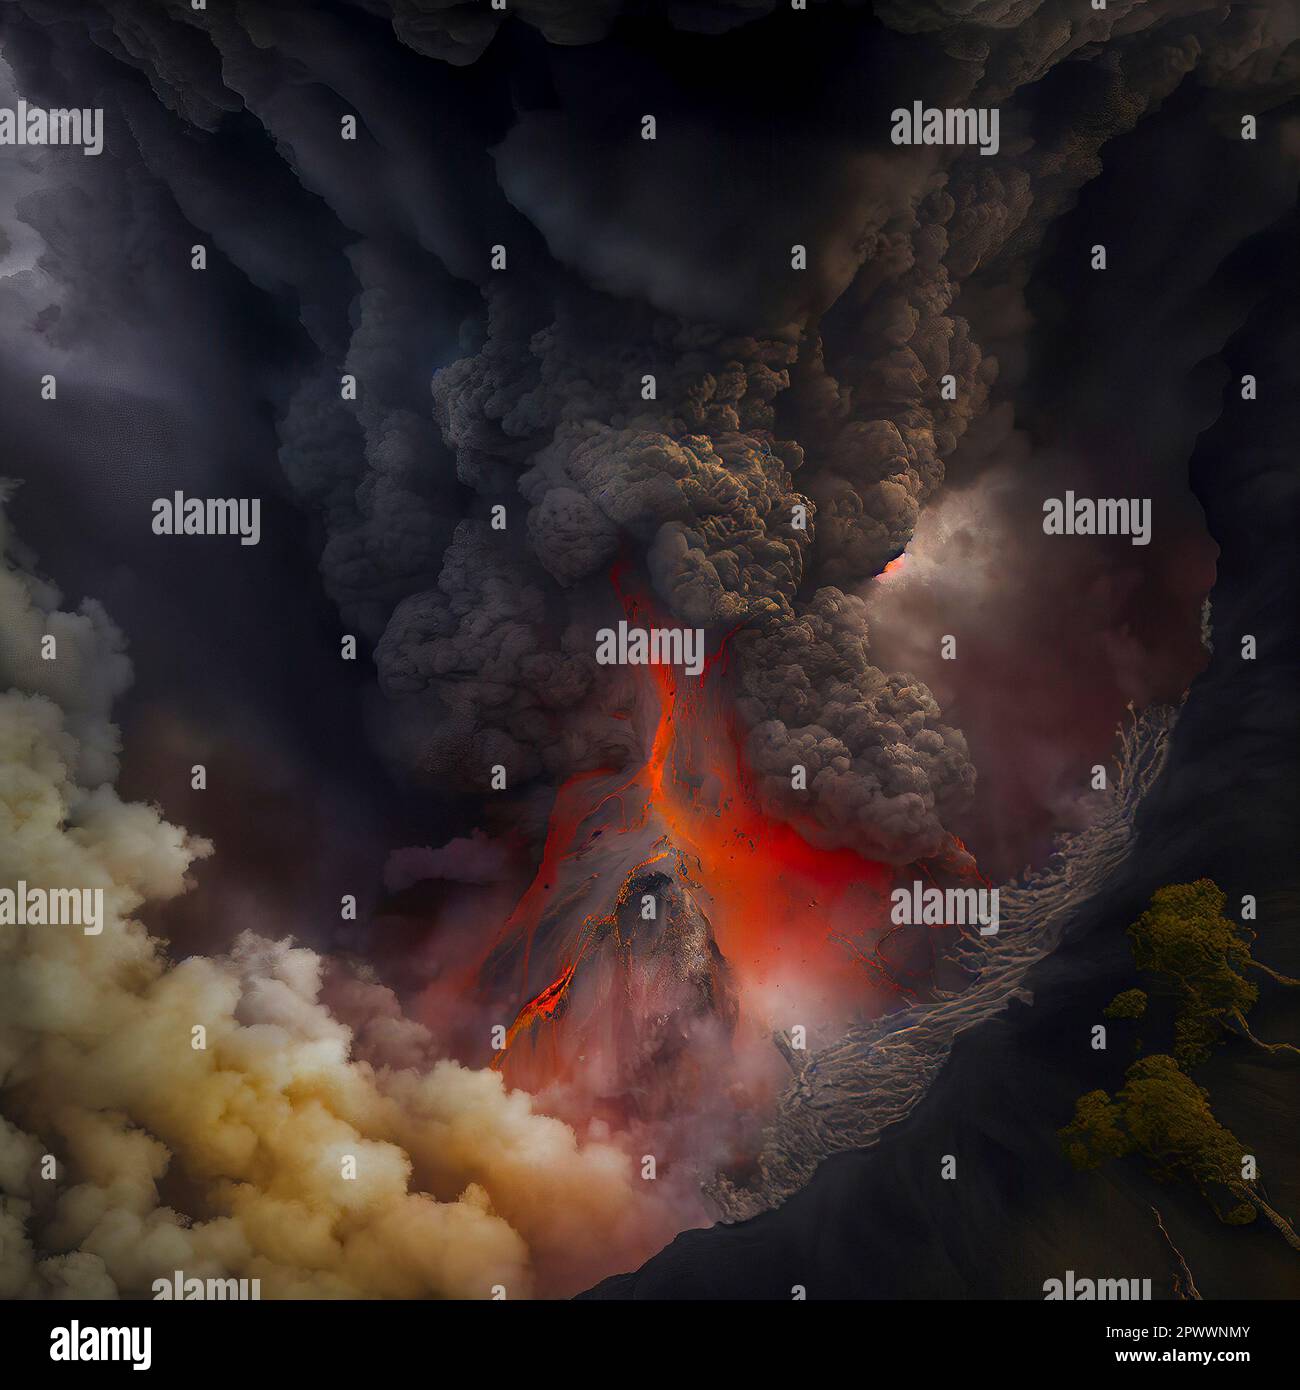 Aerial View of Billowing Smoke, Ashes and Lava rising up from an Erupting Volcano Stock Photo